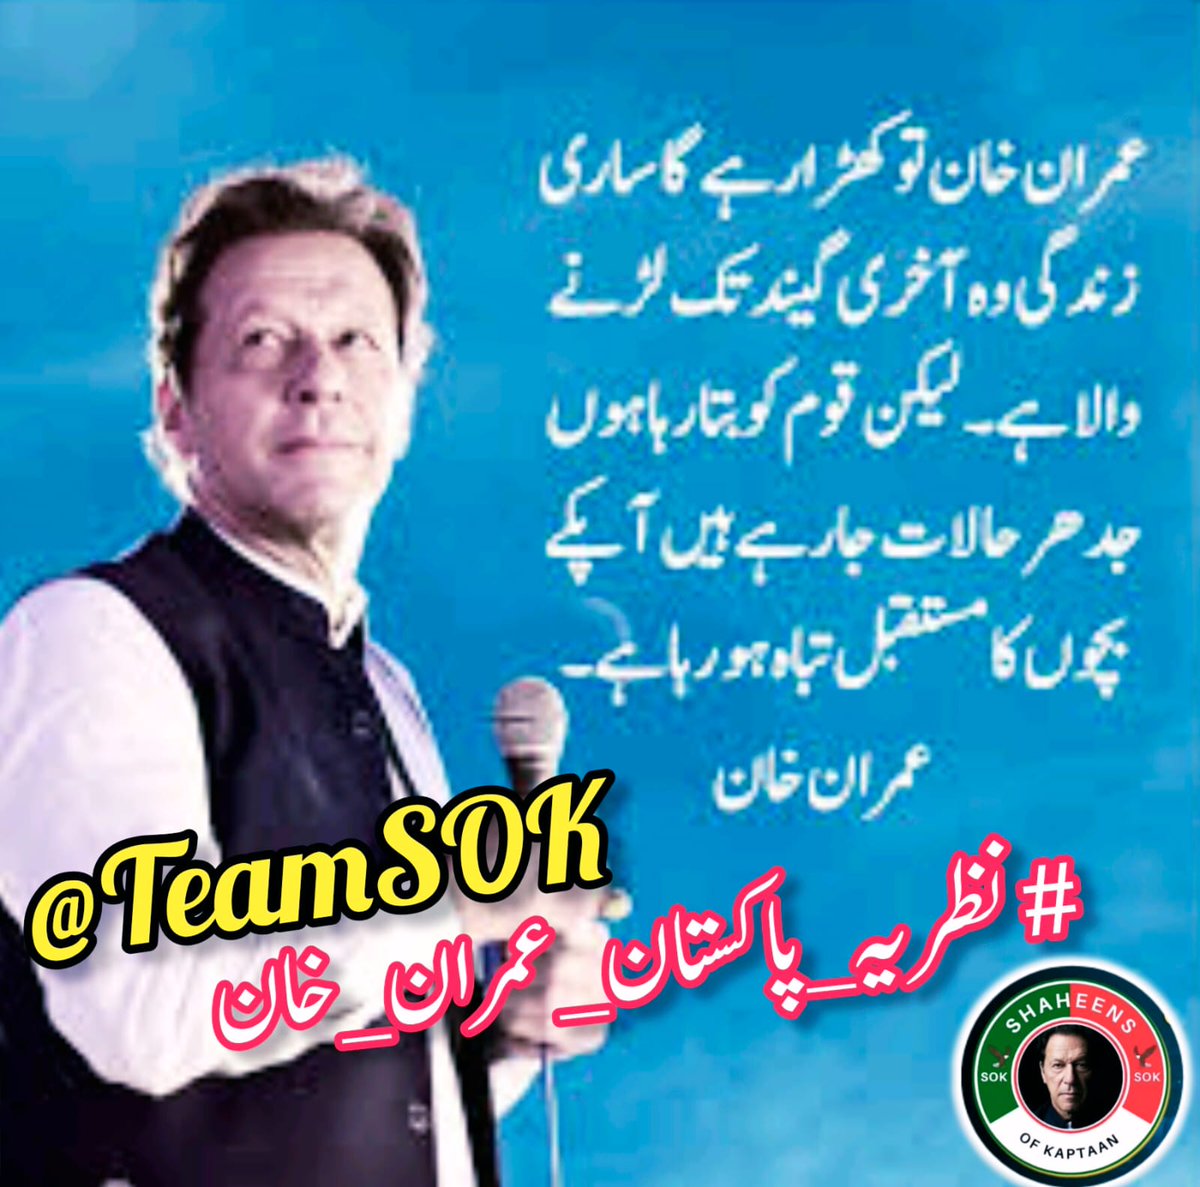 Imran Khan's leadership has brought a new era of progress and development toThere was a problem generating a response. @i_G68 #نظریہ_پاکستان_عمران_خان @TeamS0K